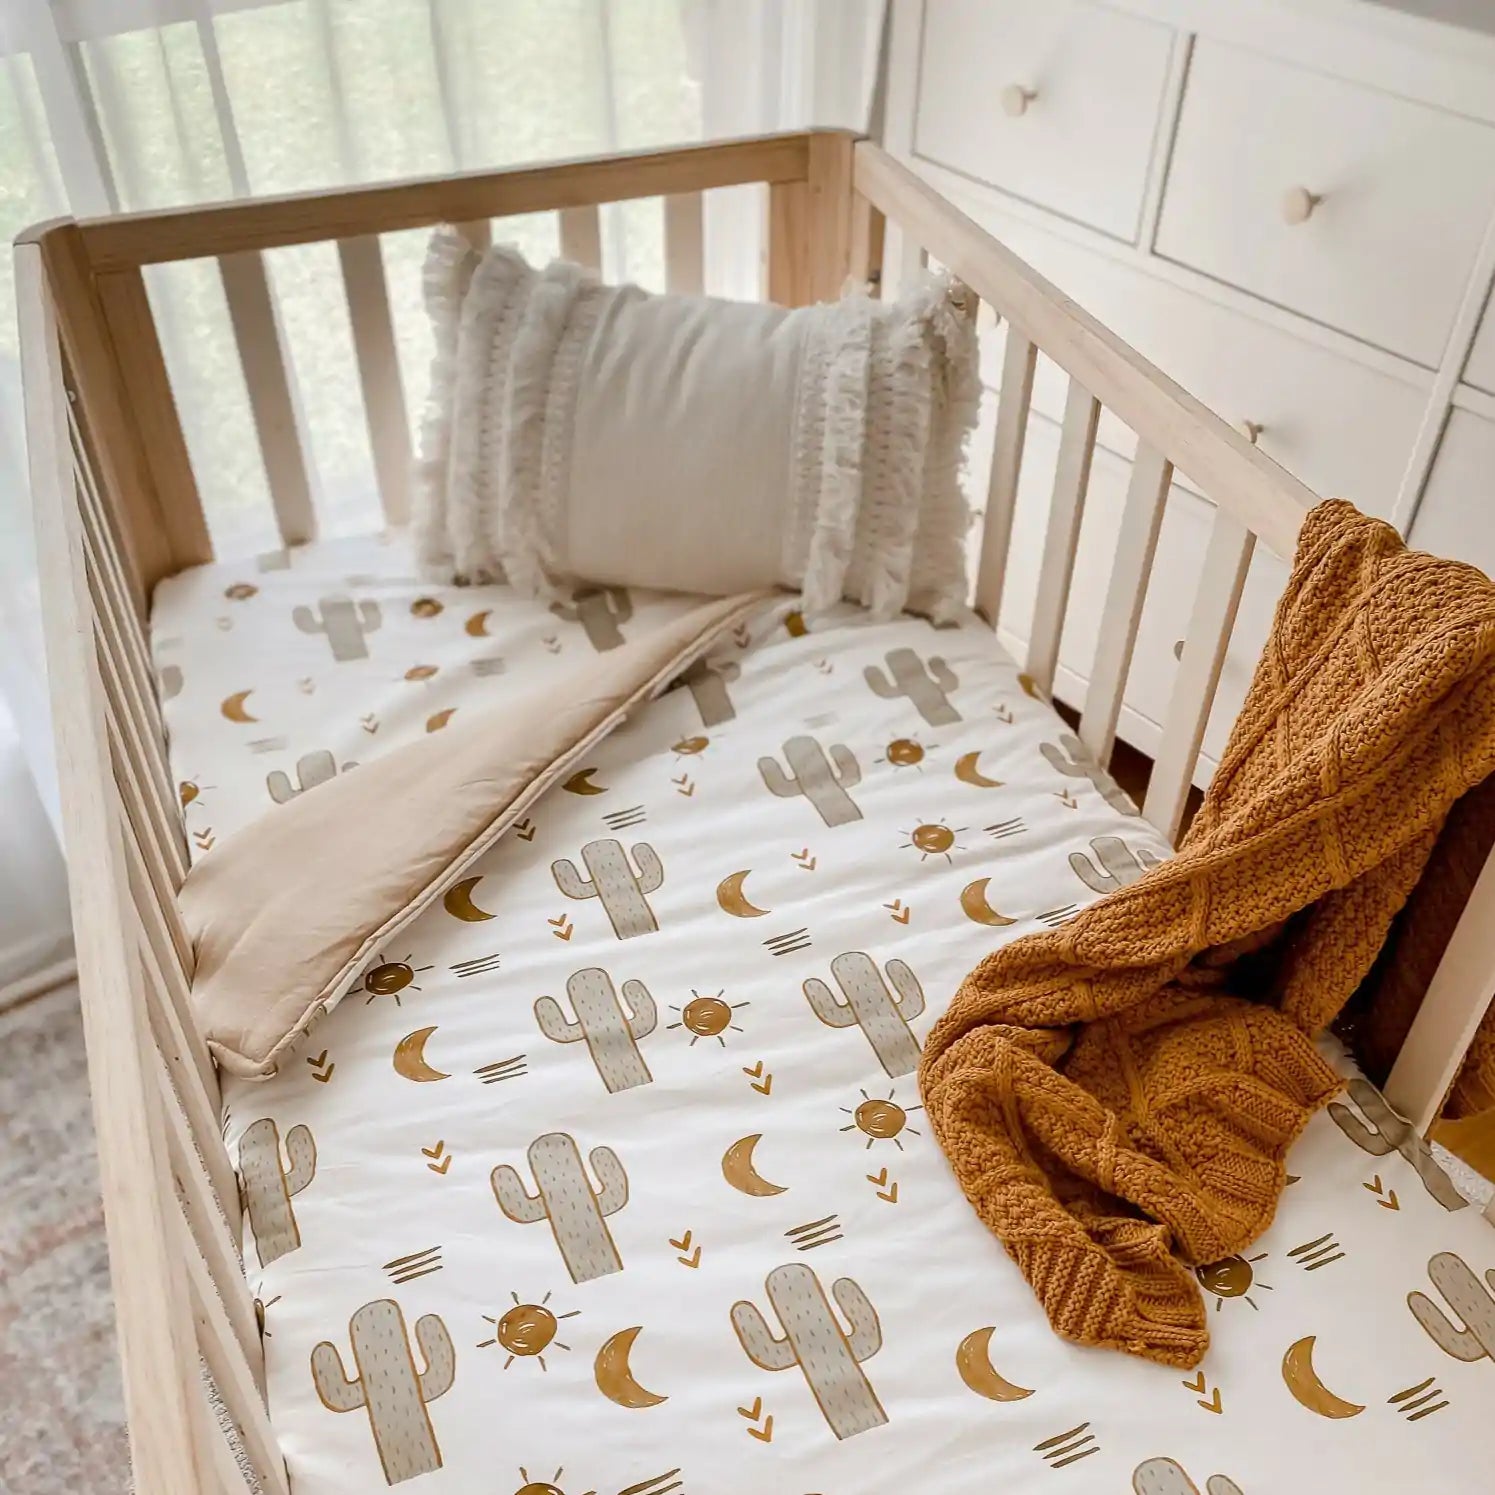 Neutral colors and prints on a cotton quilt, including a cotton knitted blanket perfect for cold weather and breathable layers Crib Size avaliable in Canada